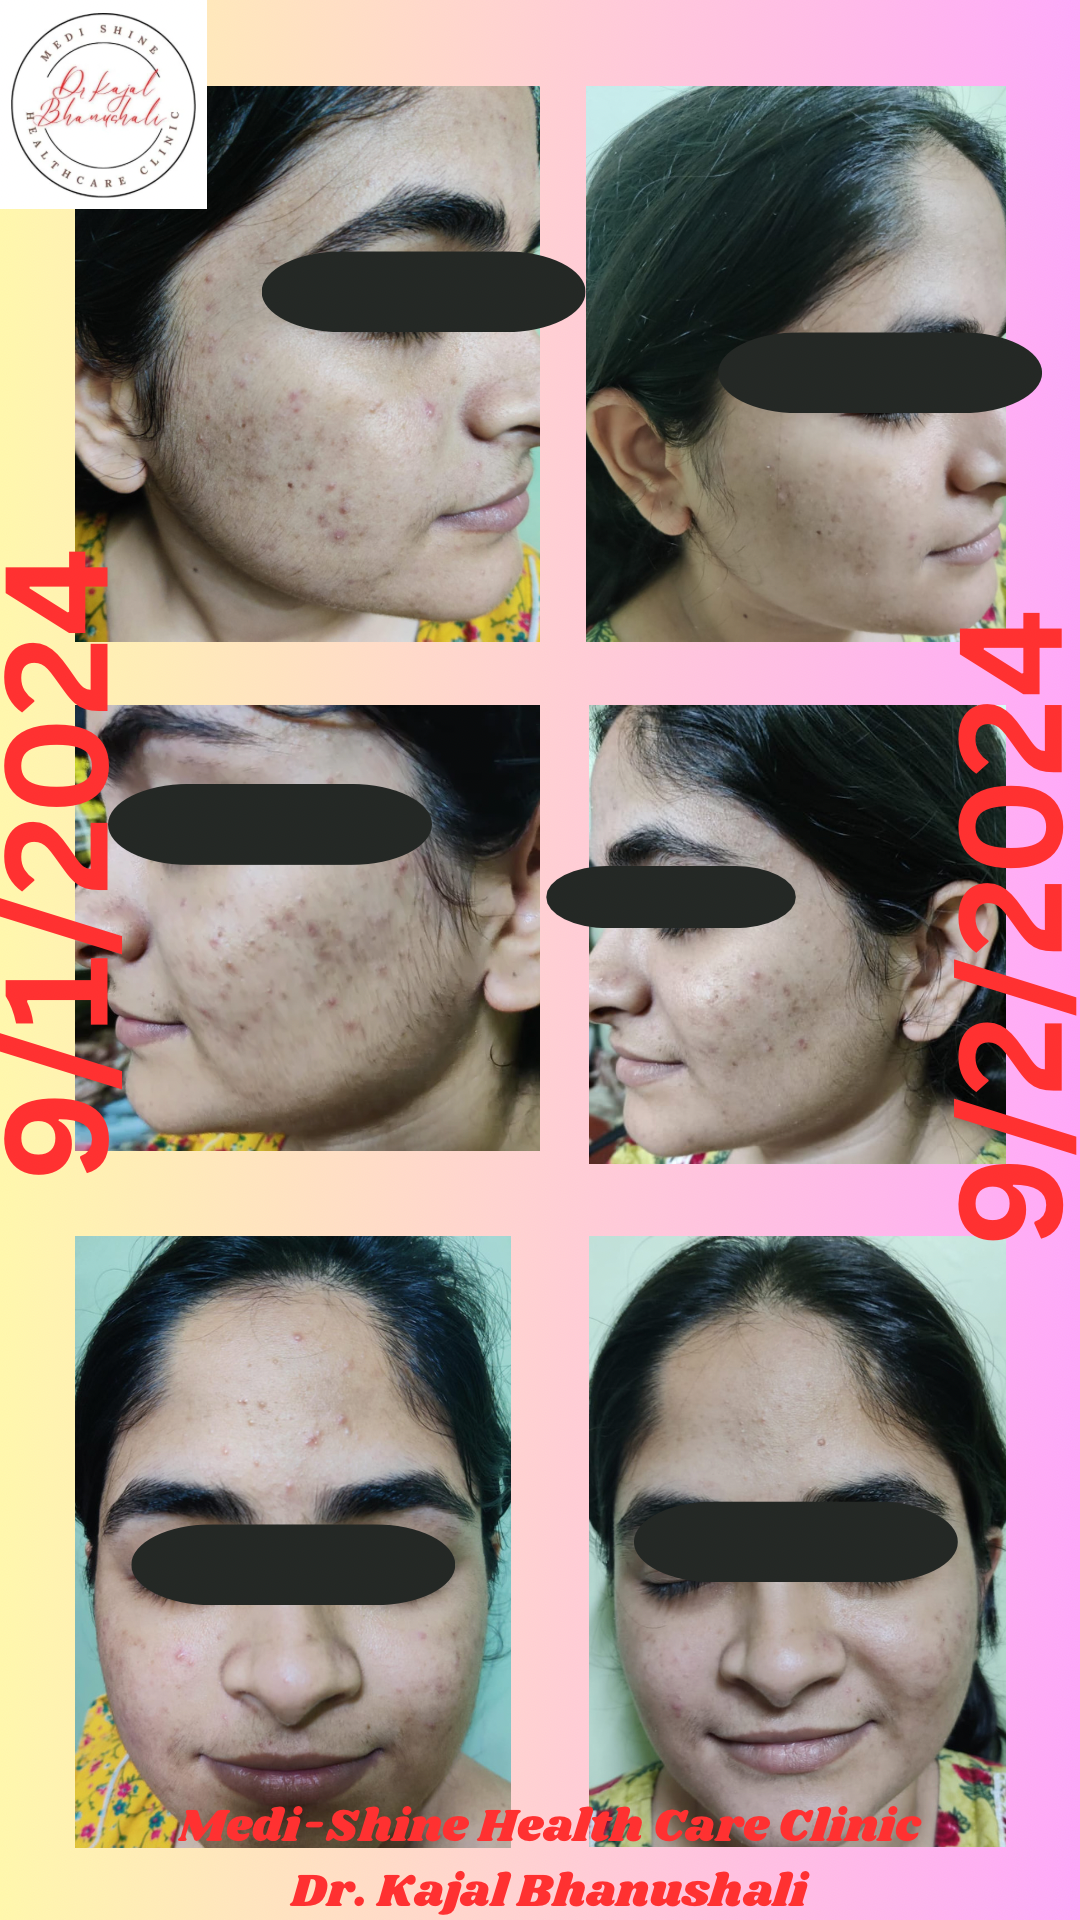 A case of PCOD induced Acne..  settling with Homoeopathy  Regularisation of Period Cycle and acne settled…  Homoeopathy Heals #trusthomoeopathy